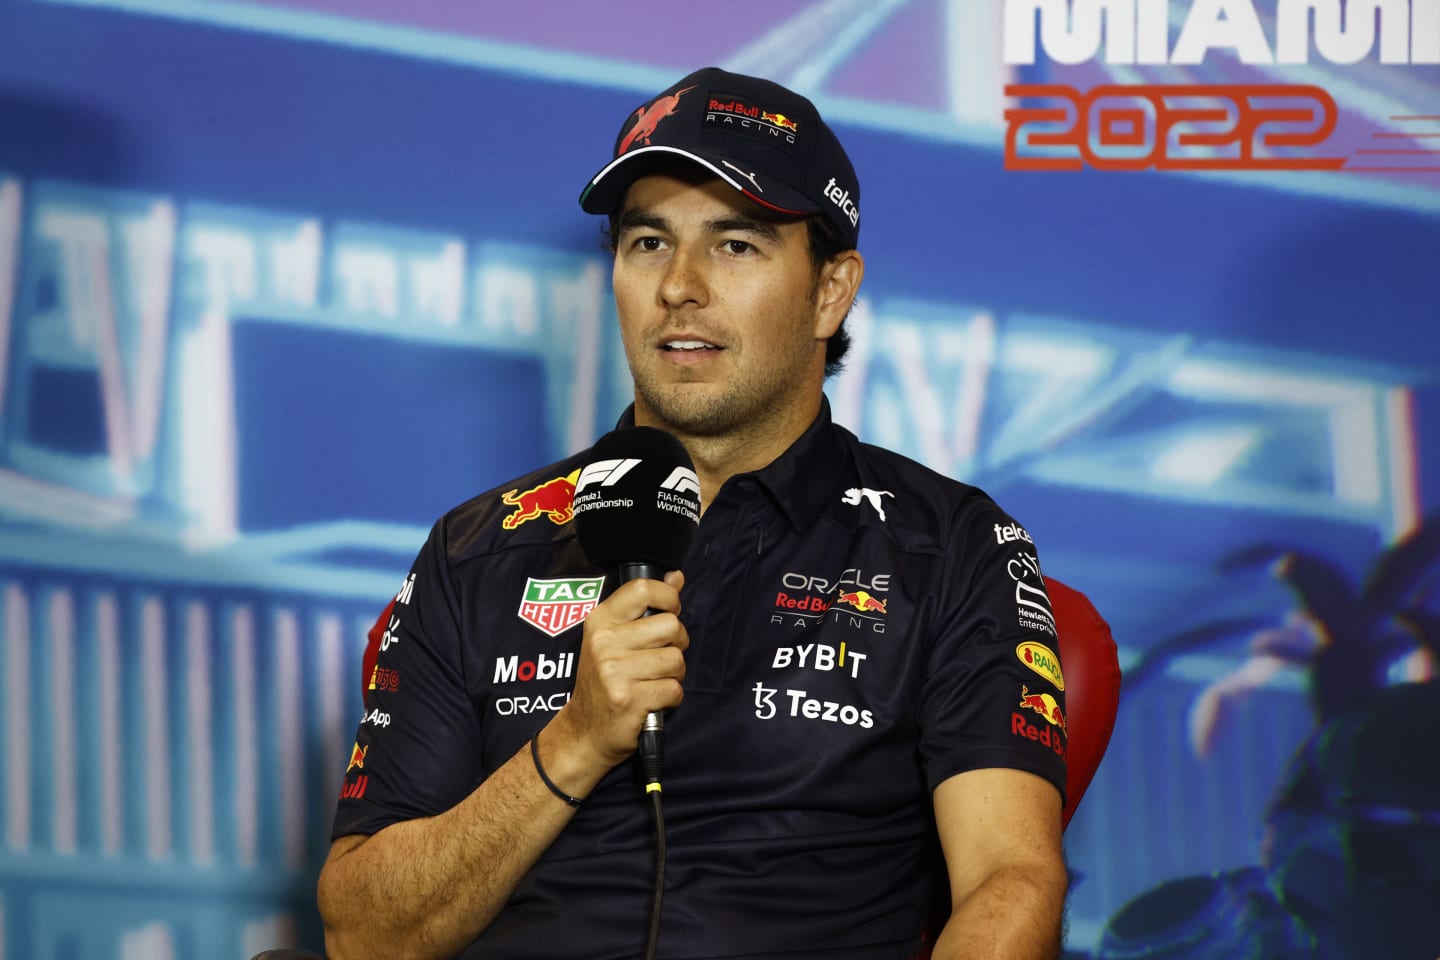 MIAMI, FLORIDA - MAY 06: Sergio Perez of Mexico and Oracle Red Bull Racing talks in the Drivers Press Conference prior to practice ahead of the F1 Grand Prix of Miami at the Miami International Autodrome on May 06, 2022 in Miami, Florida. (Photo by Jared C. Tilton/Getty Images)